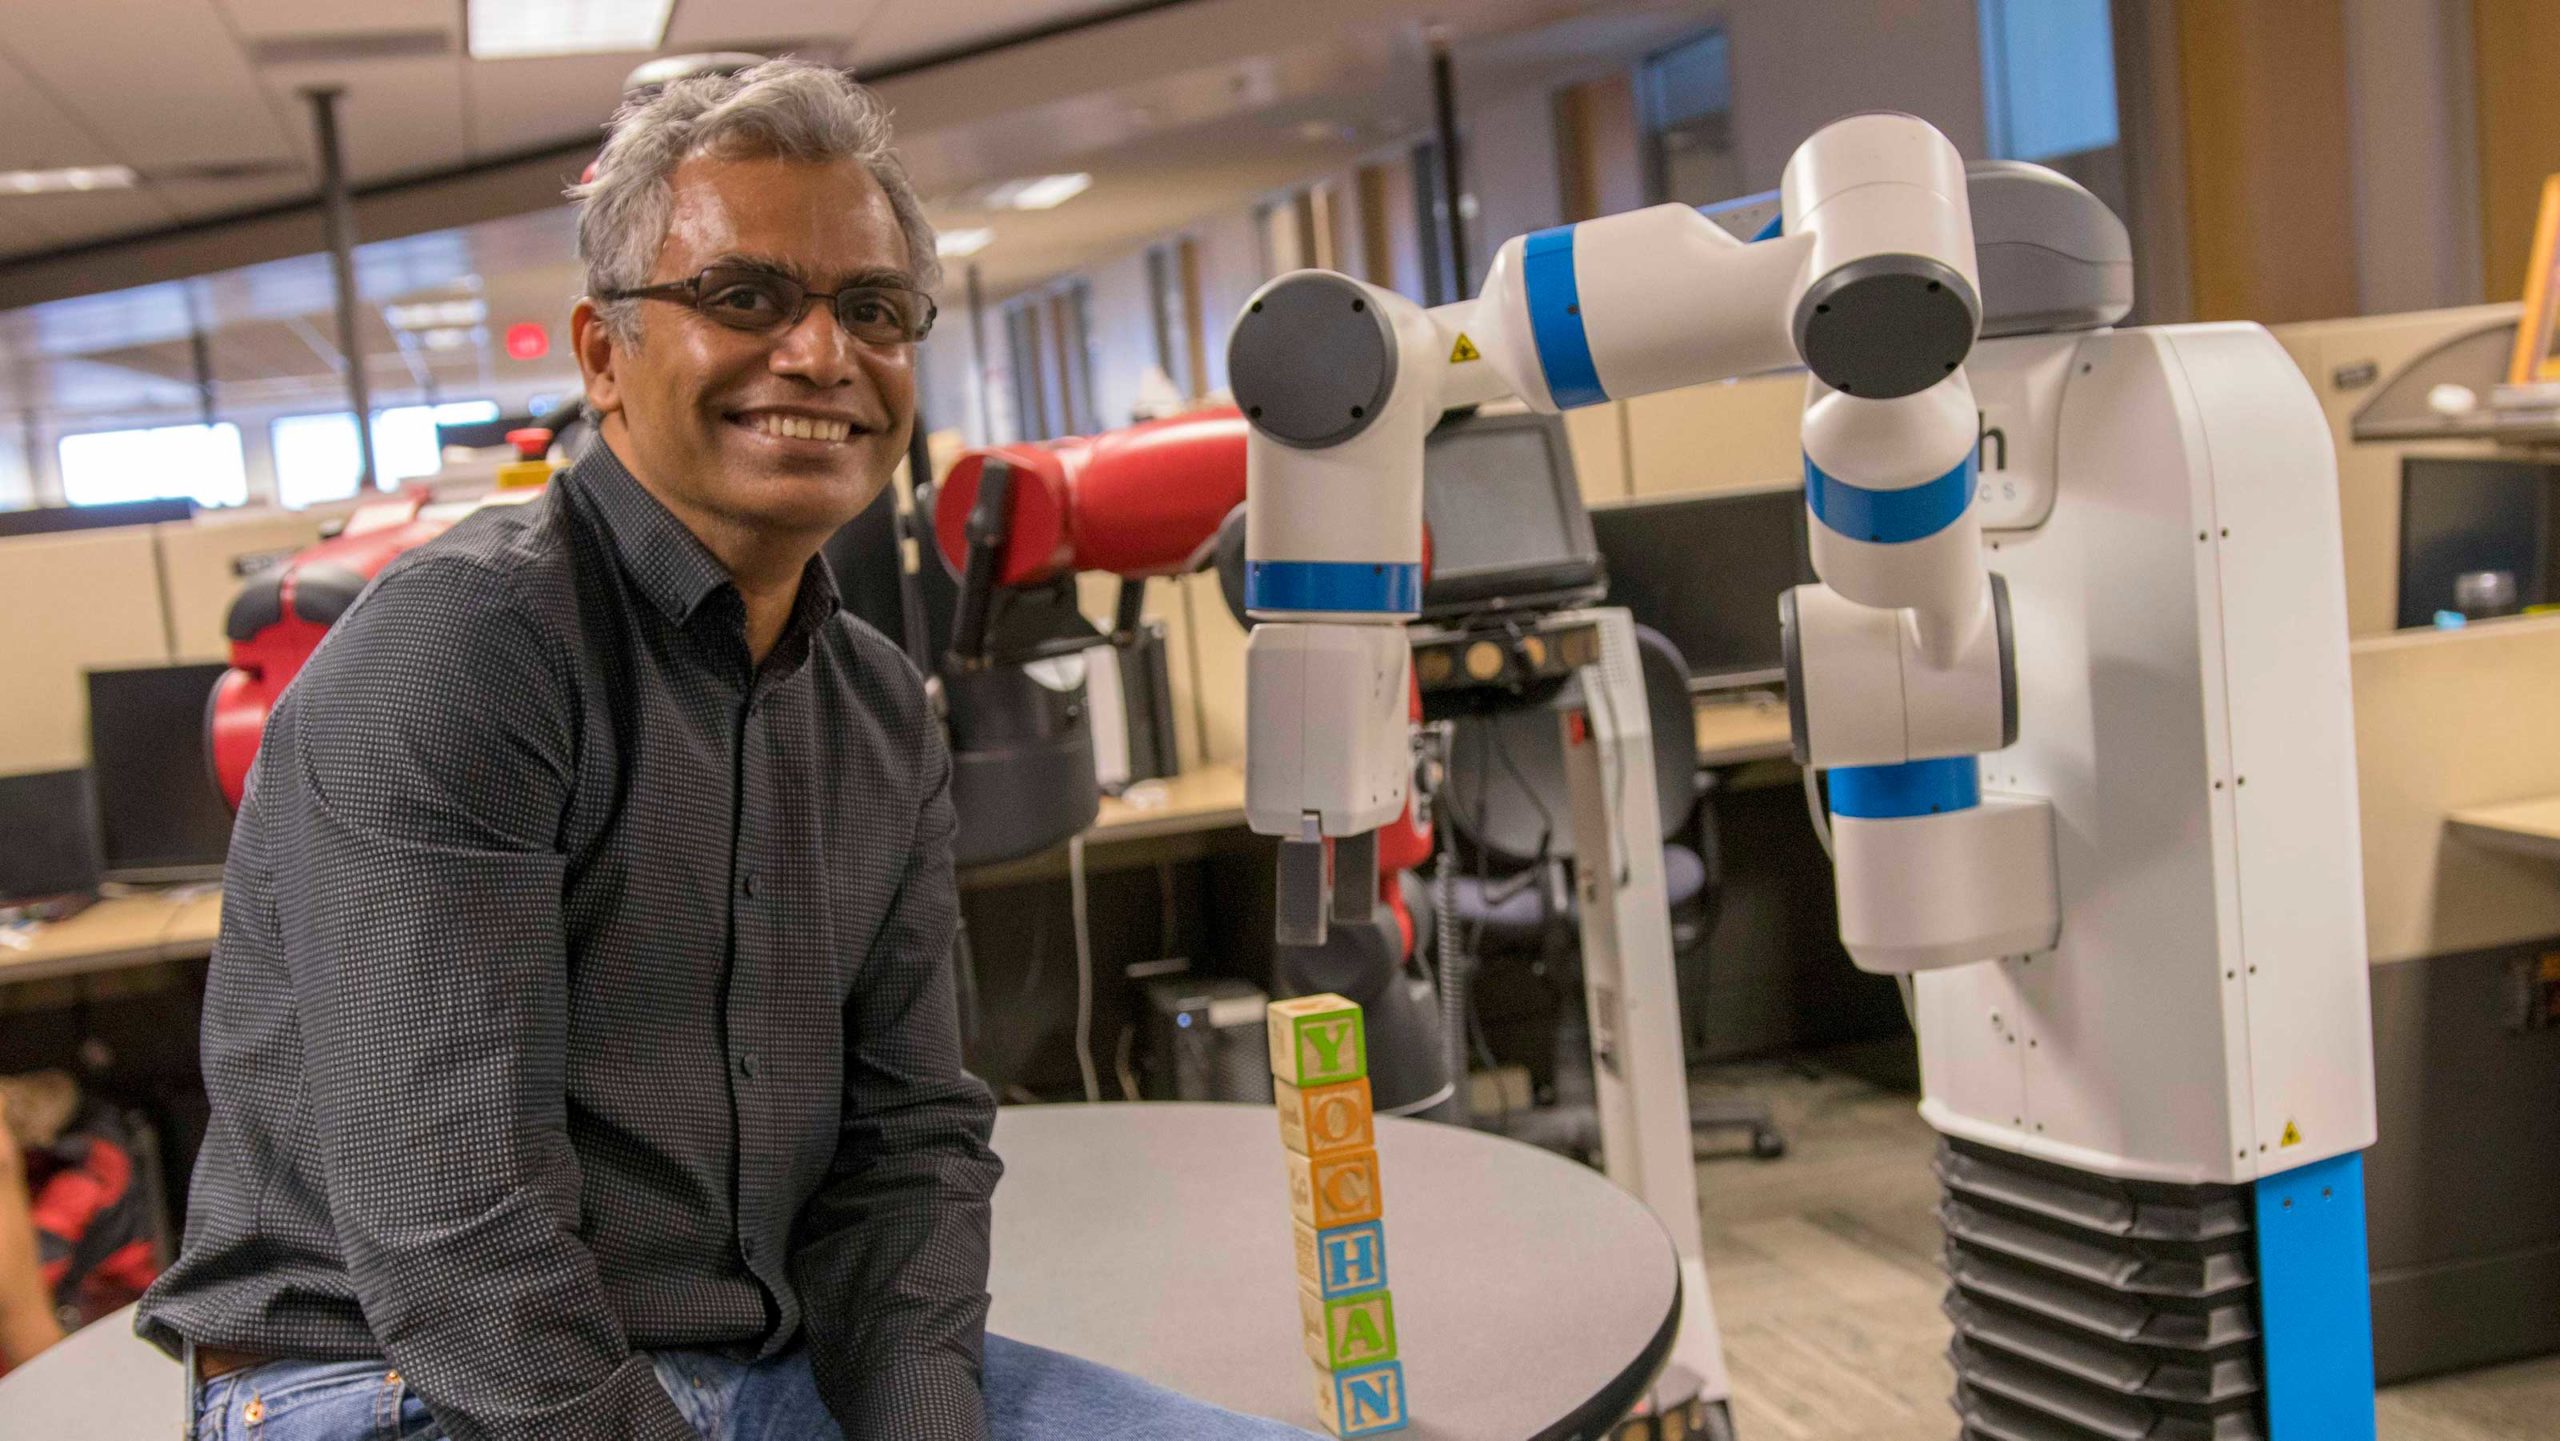 Rao Kambhampati, named ACM Fellow, poses for the camera in his lab next to a robot that has just stacked some alphabet blocks.